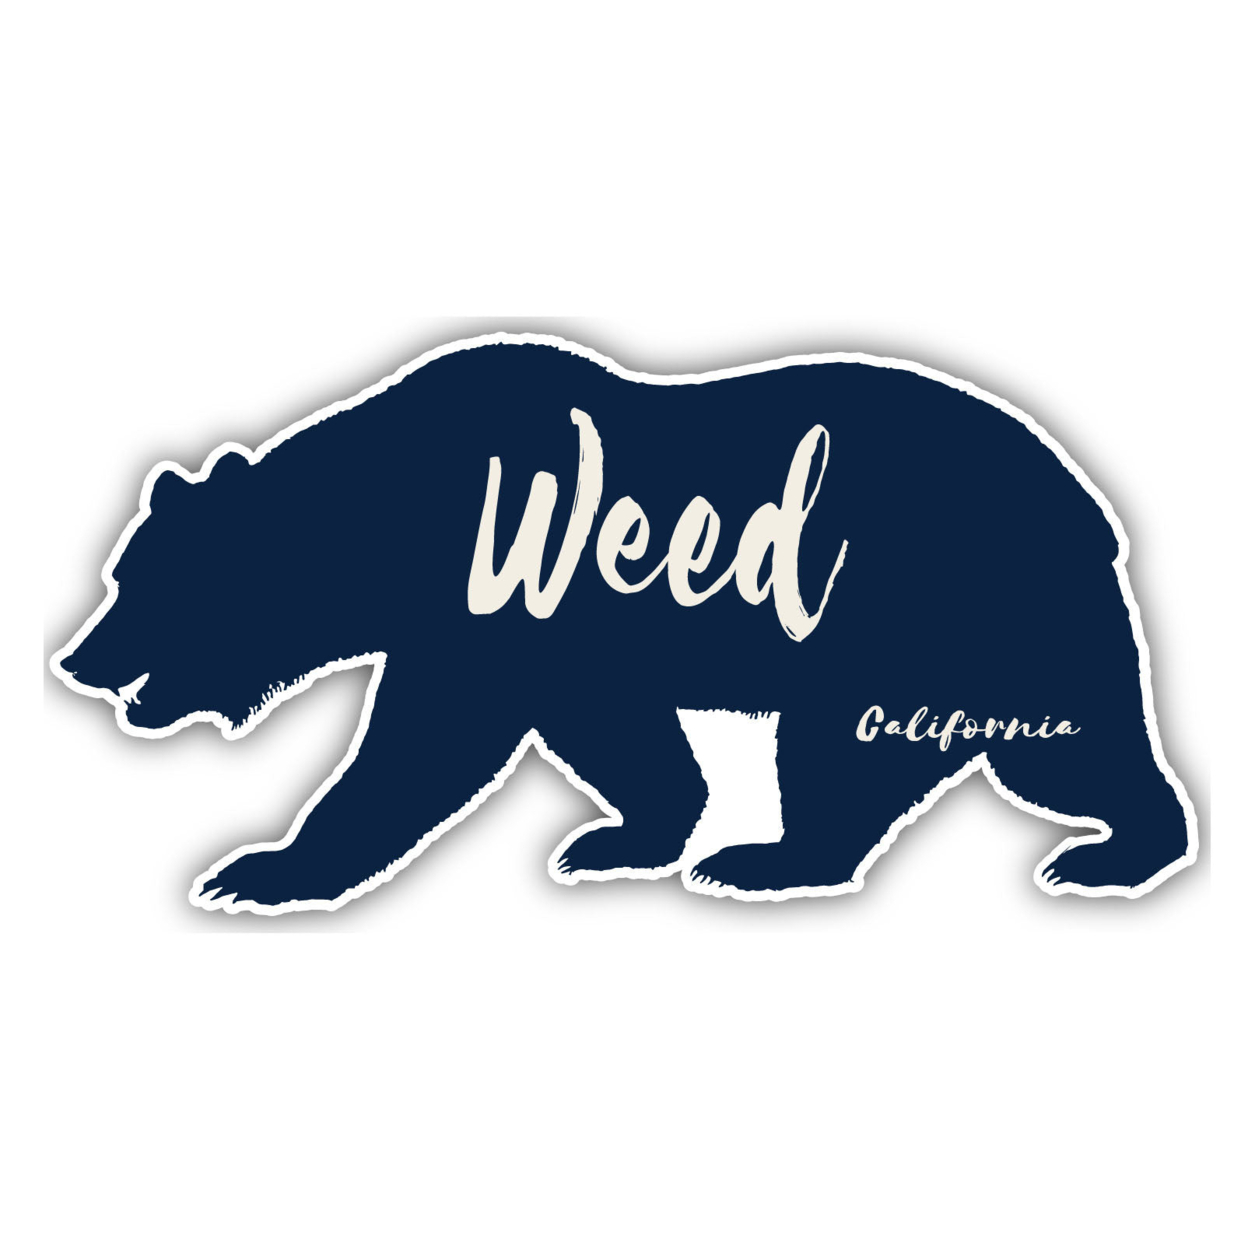 Weed California Souvenir Decorative Stickers (Choose Theme And Size) - Single Unit, 4-Inch, Bear